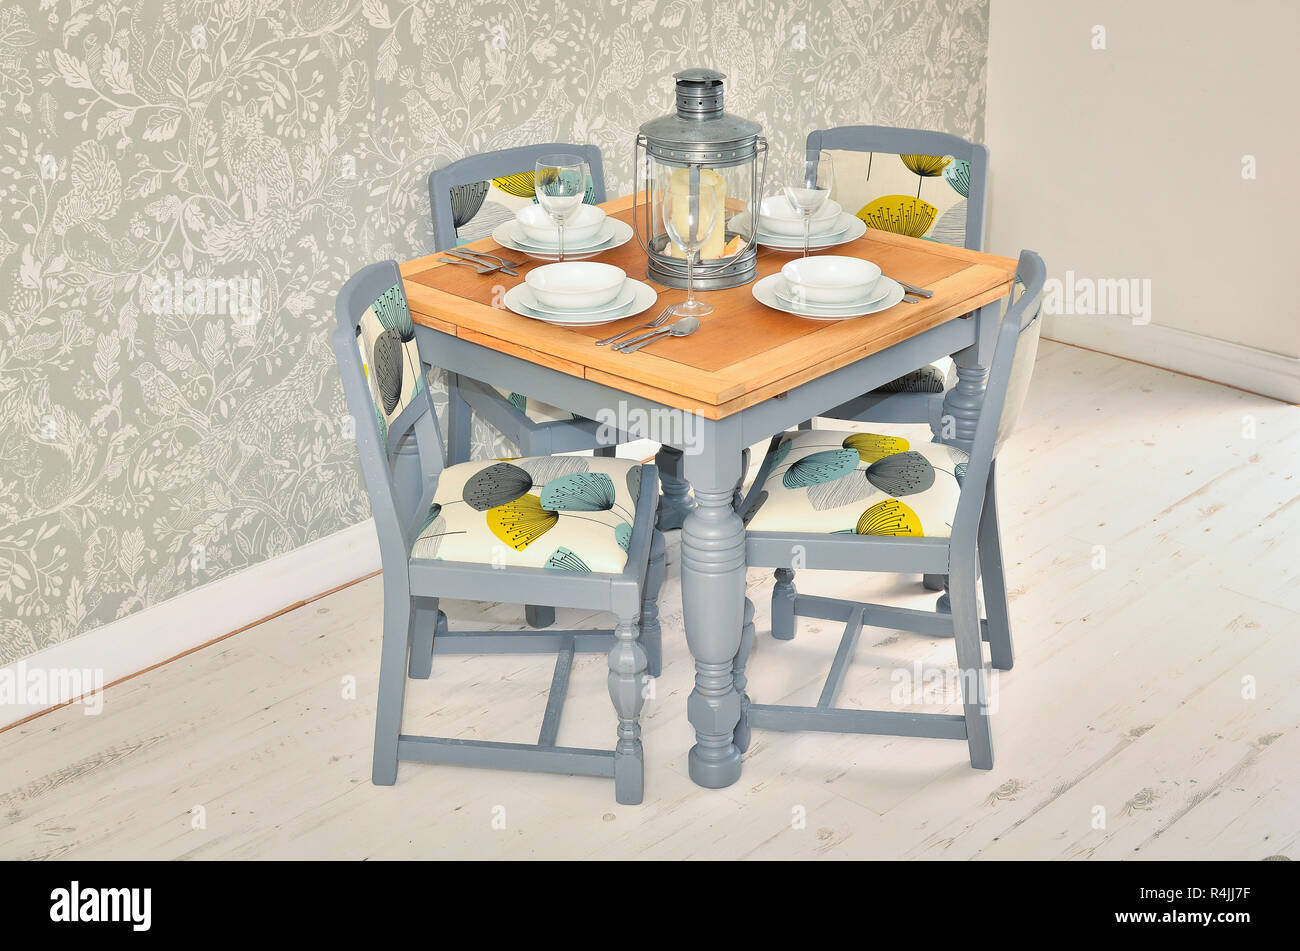 Shabby Chic Dining Table With Chairs And Tableware Stock Photo Alamy